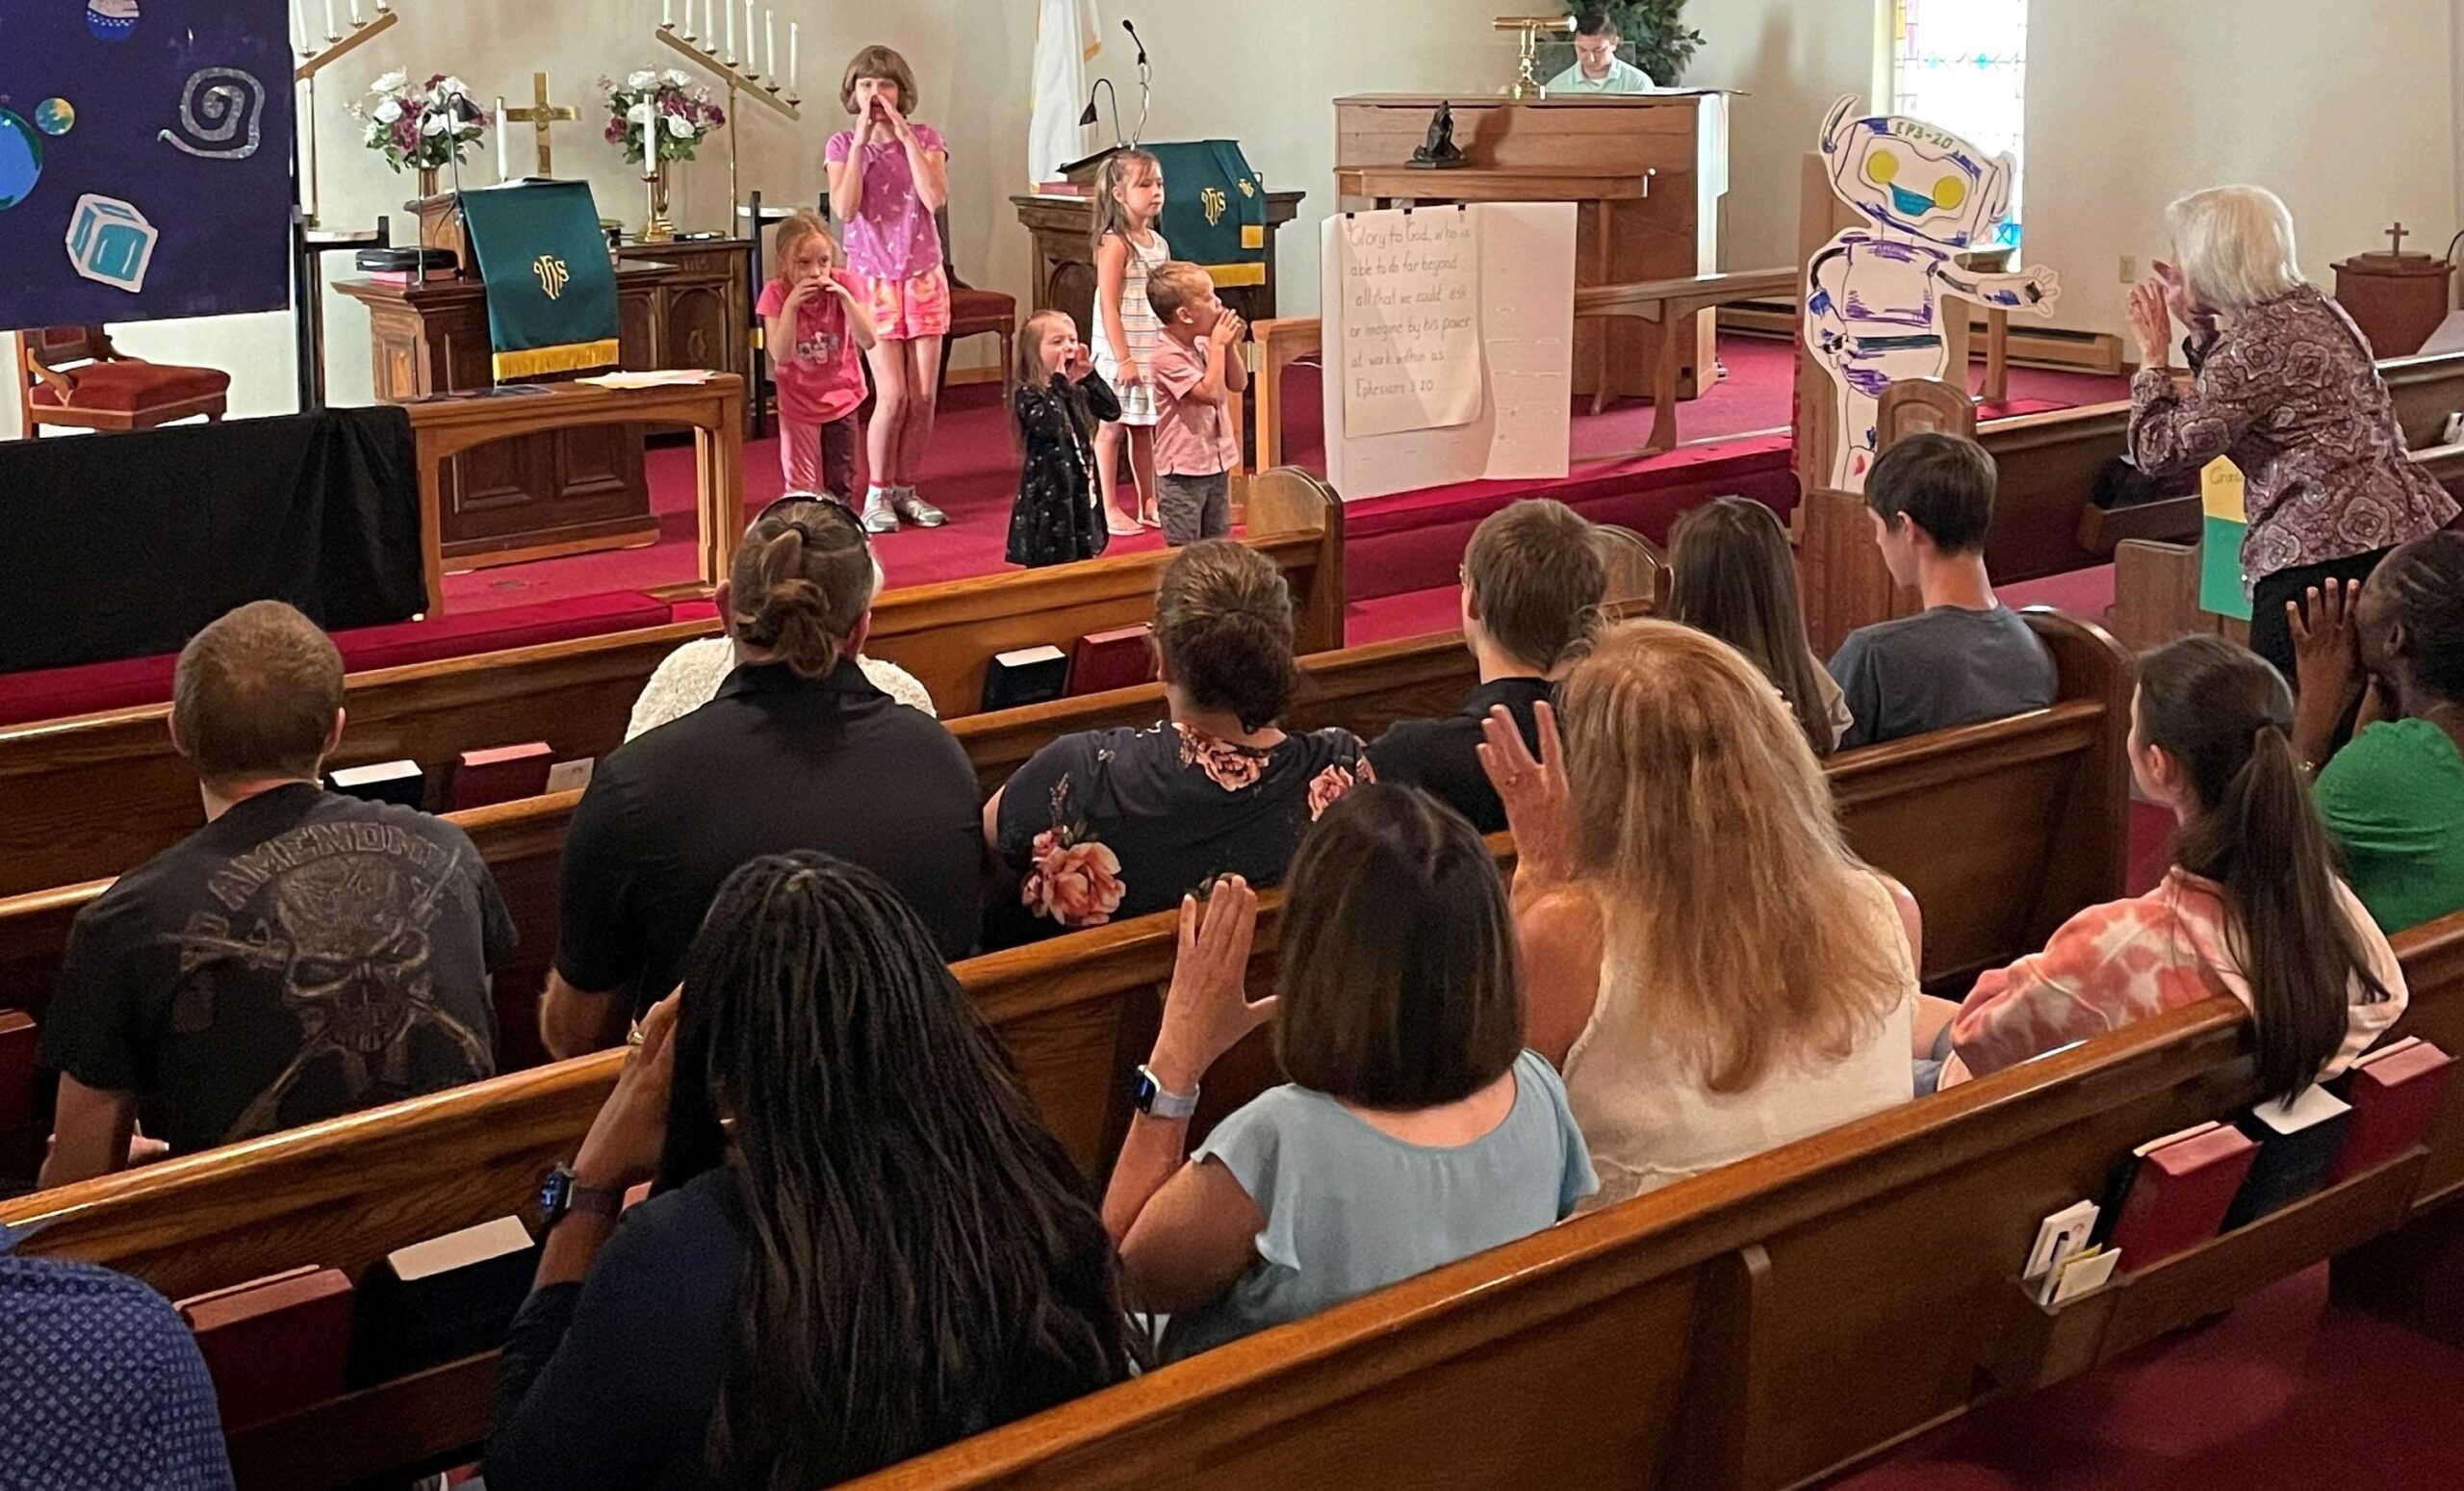 Featured image for “All the World Needs Our Witness: Celebrating Laity Sunday with Children”